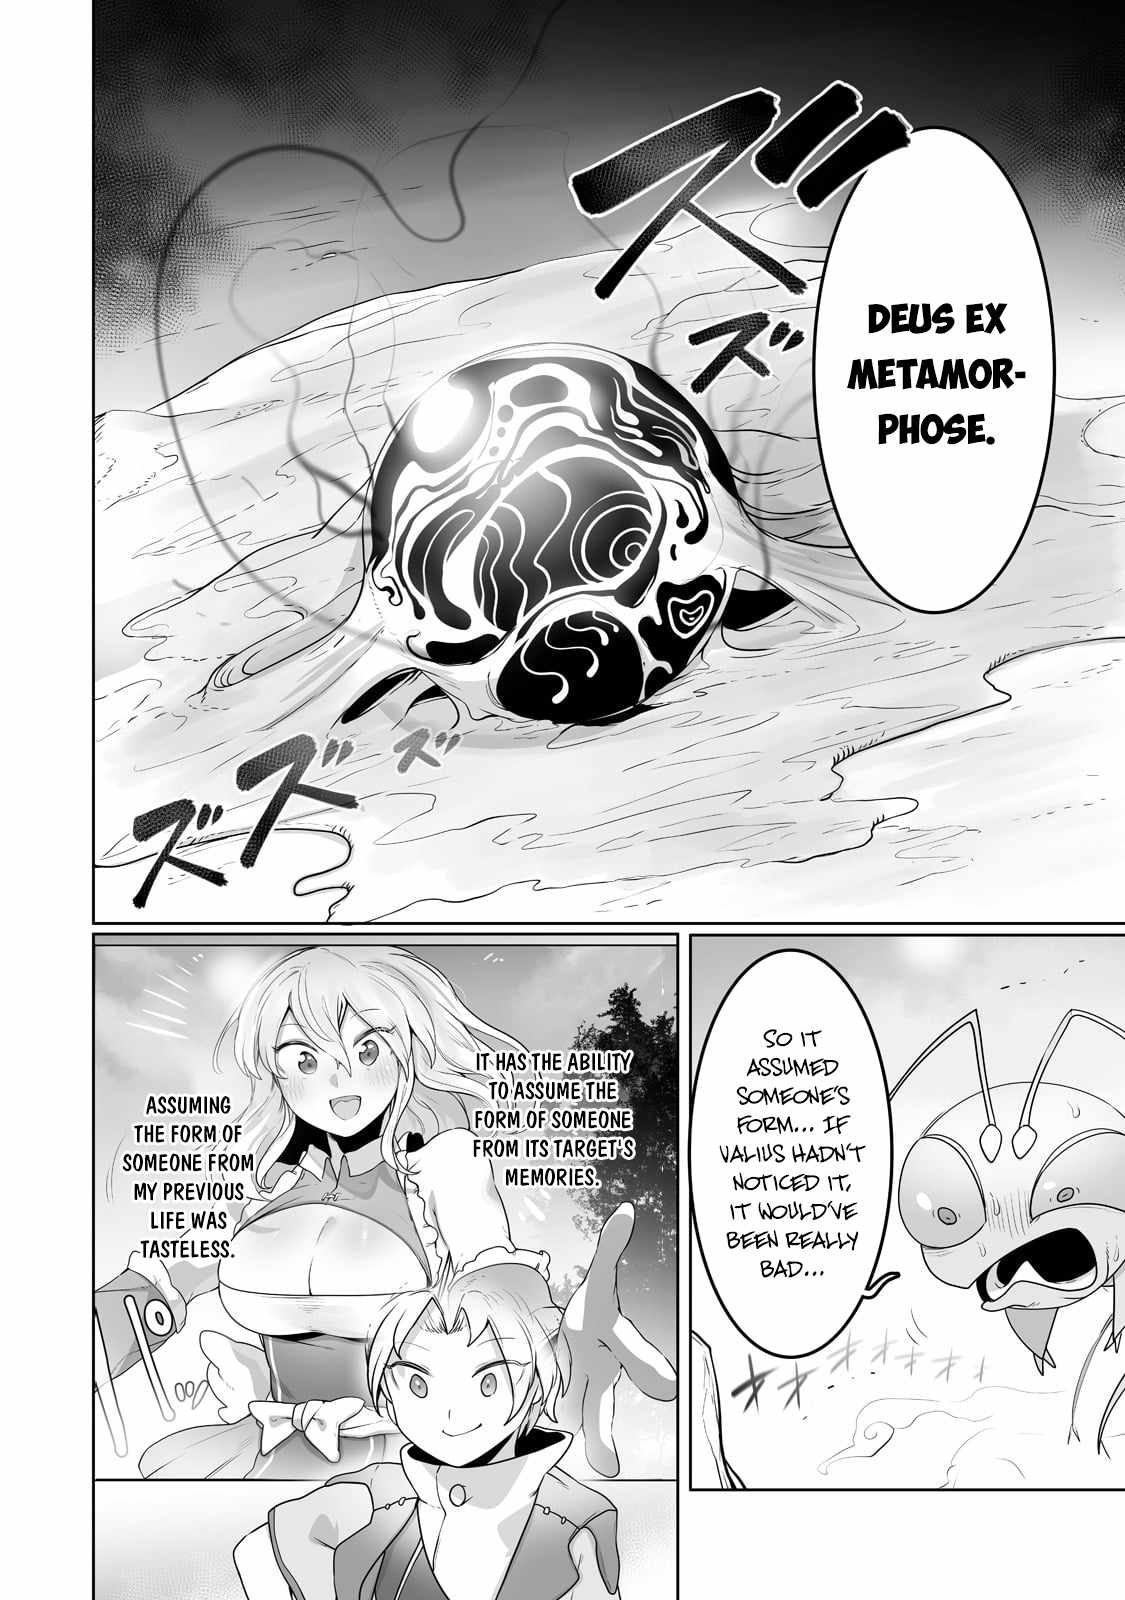 The Useless Tamer Will Turn into the Top Unconsciously by My Previous Life Knowledge Chapter 24-eng-li - Page 10